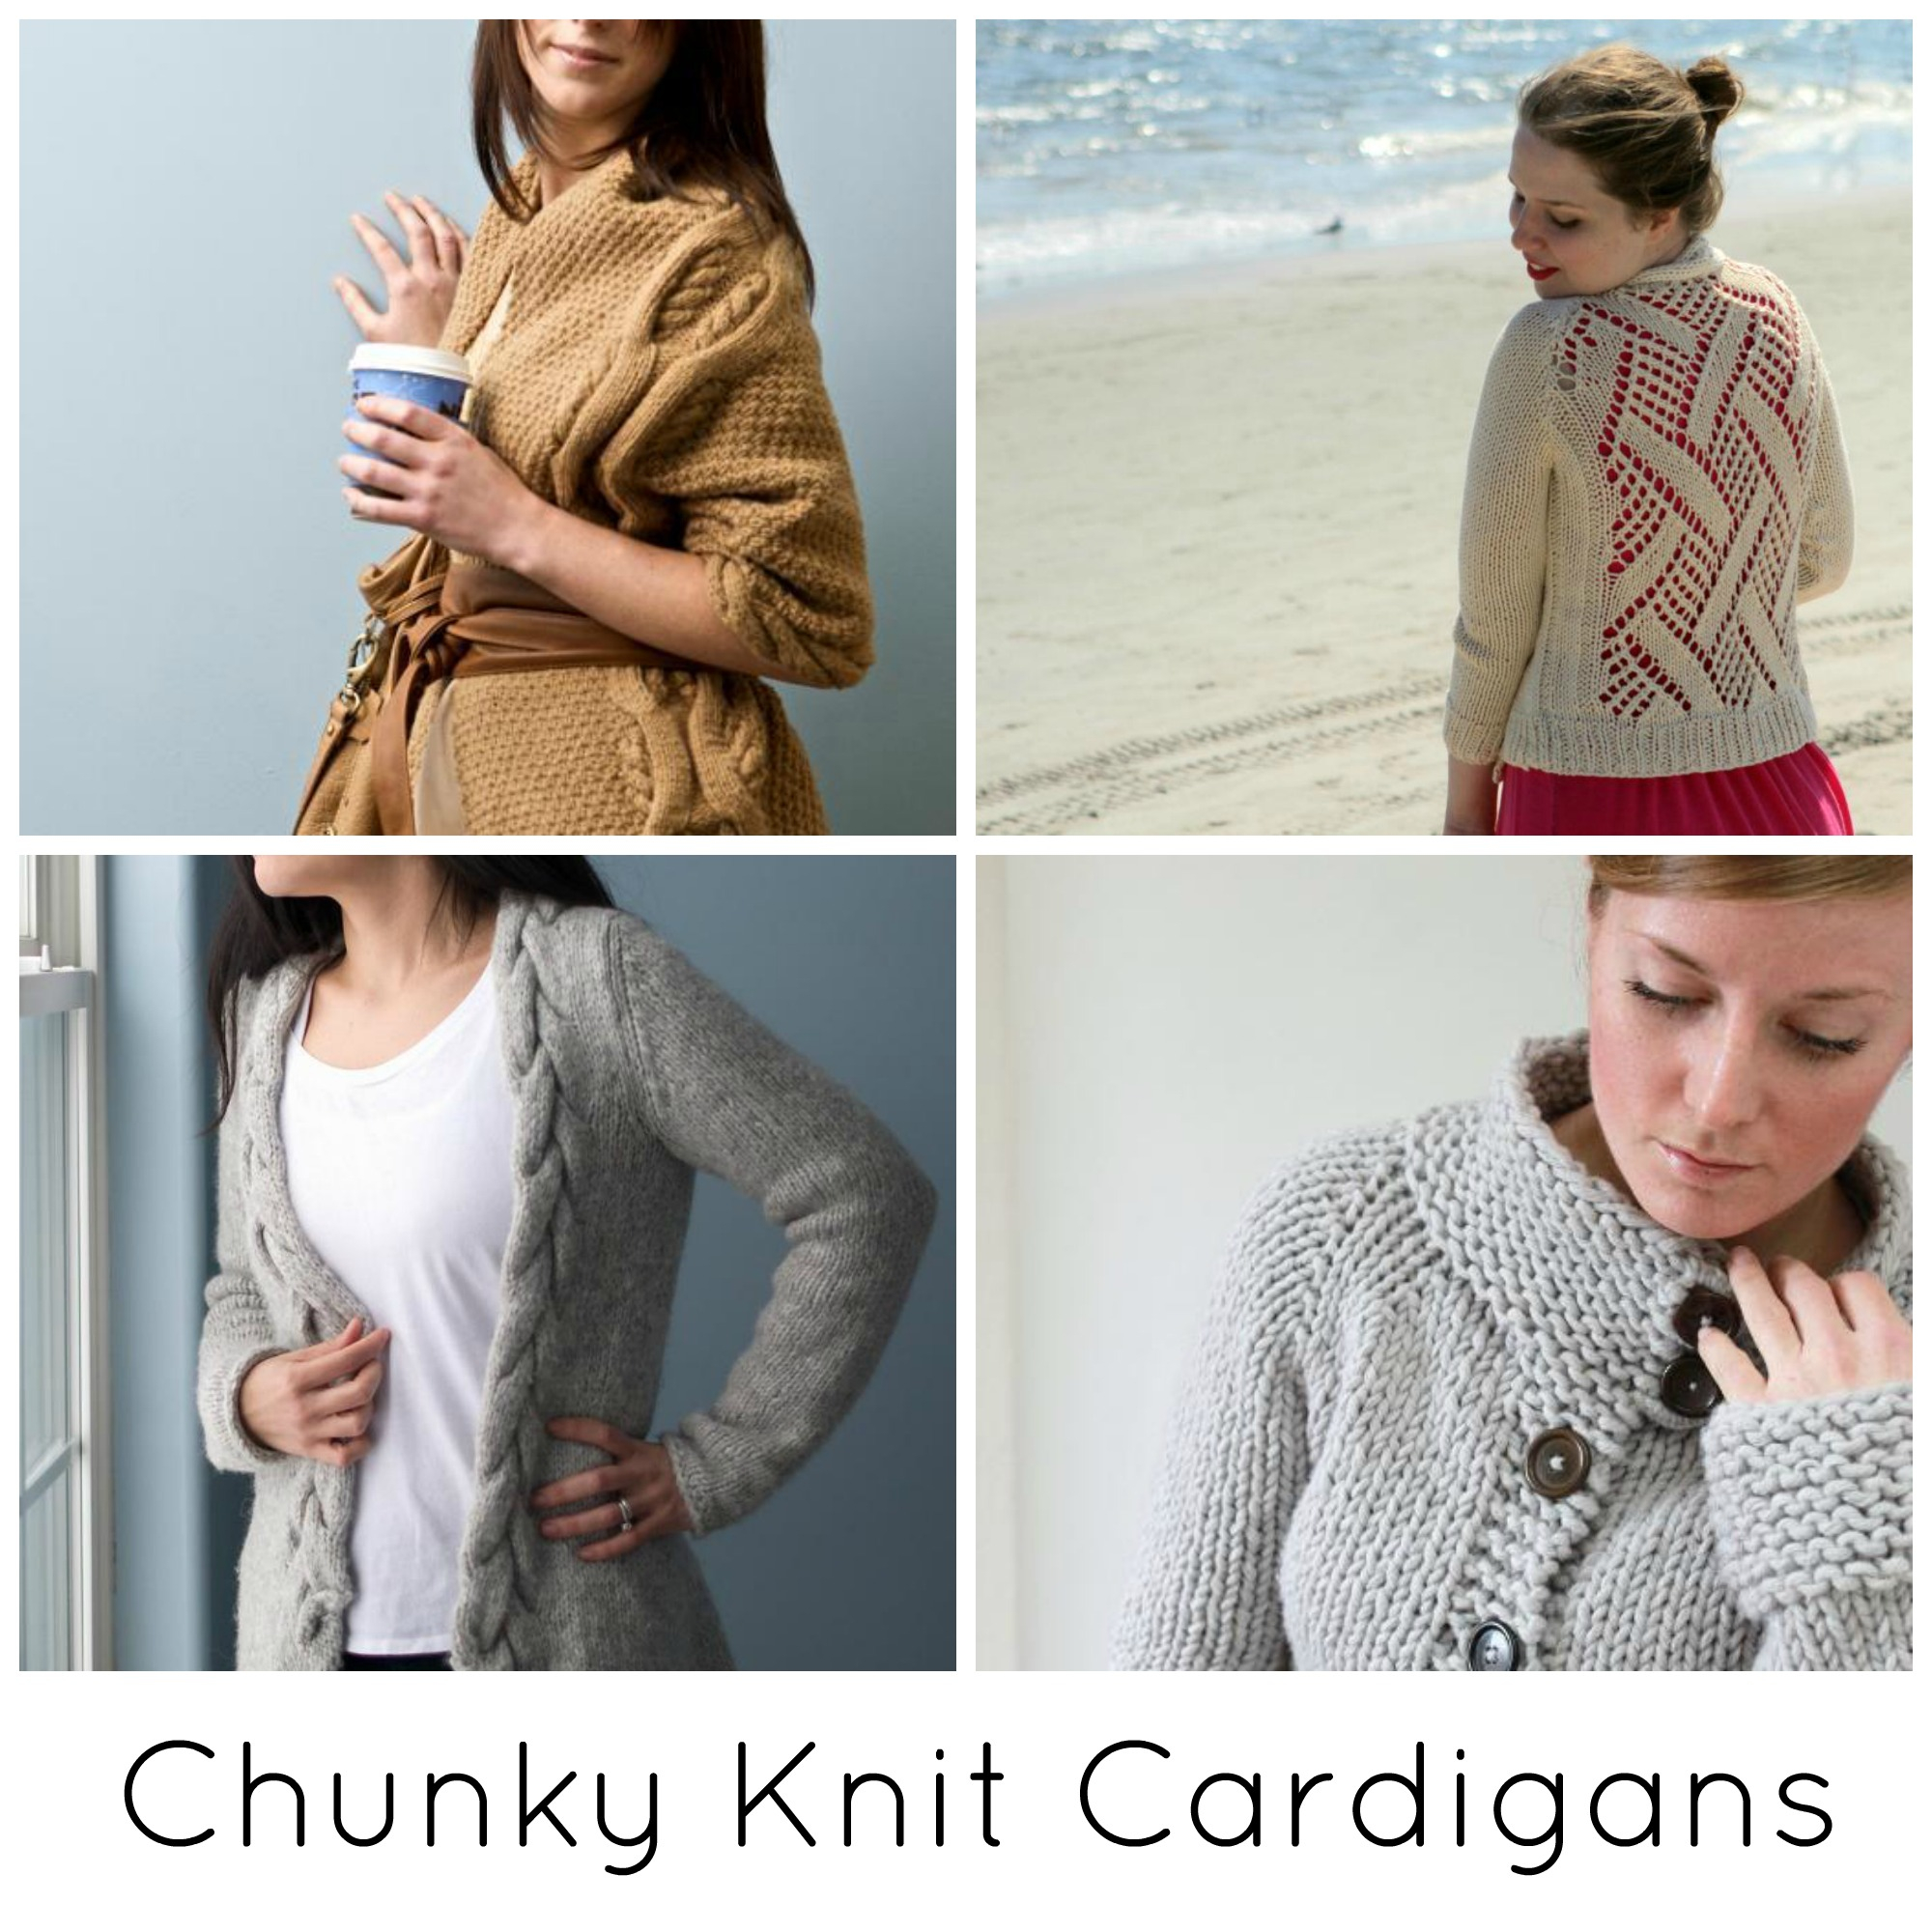 Free Bulky Knitting Patterns The Coziest Chunky Knit Cardigan Patterns Ever